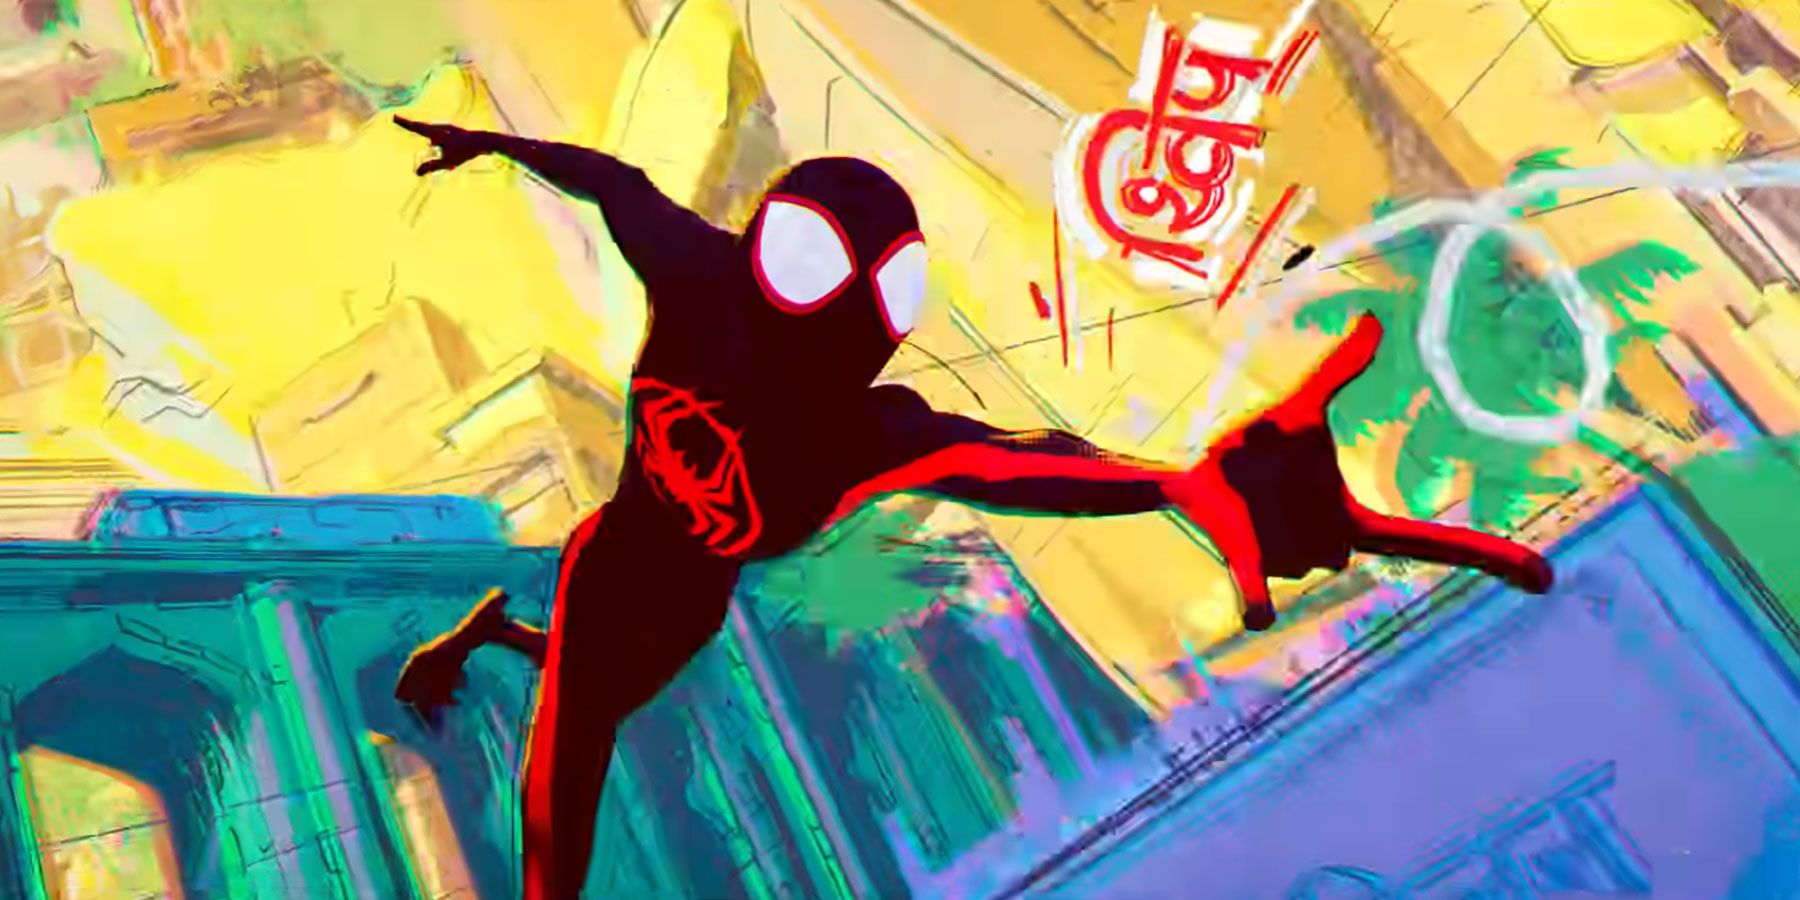 Miles Morales shooting web in front of a colorful yellow background